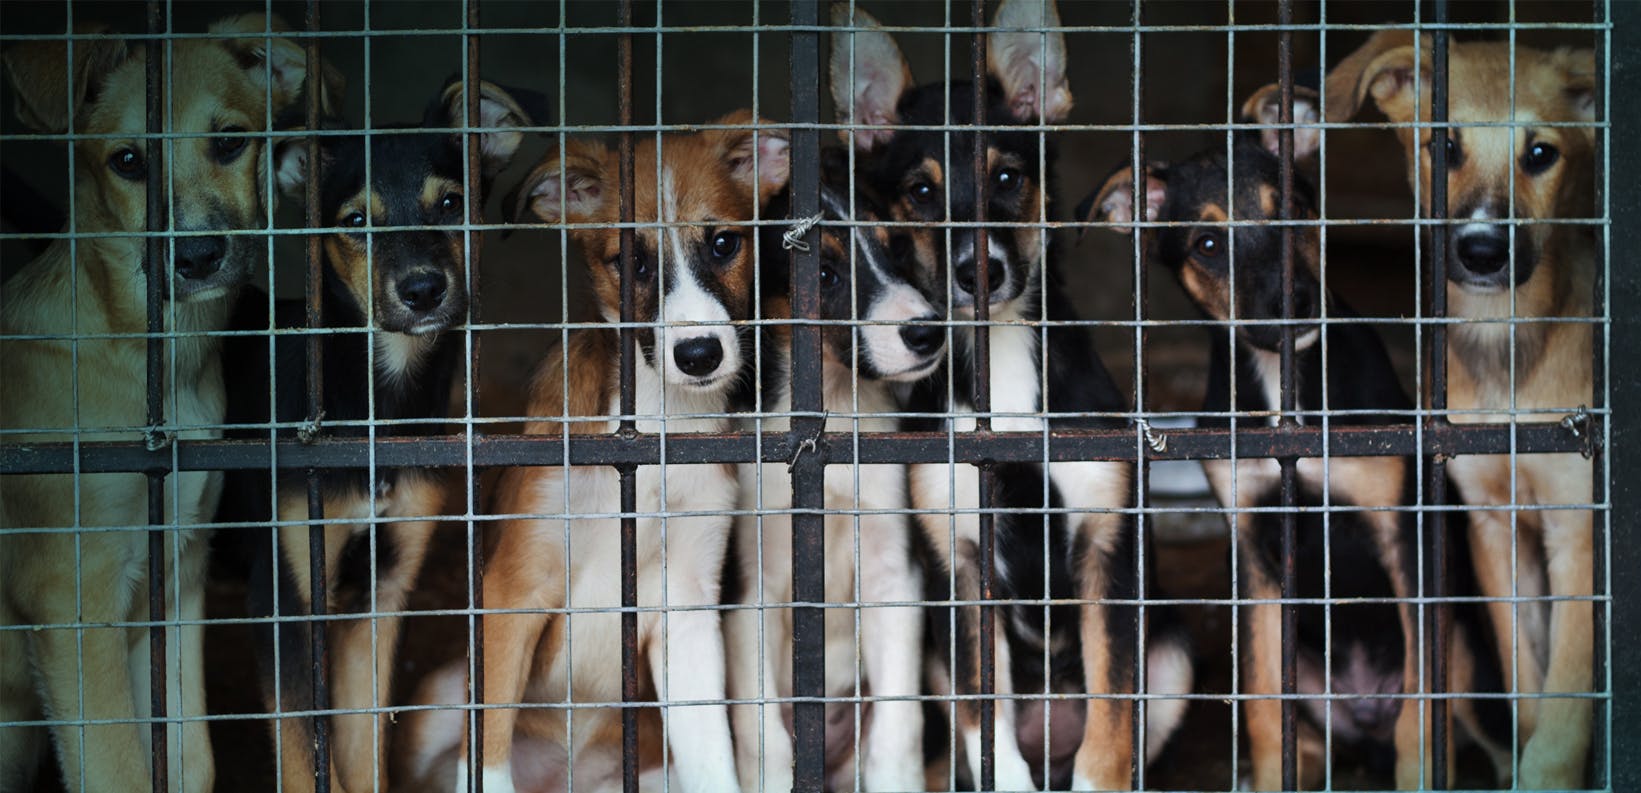 The thorny problem of puppy mills